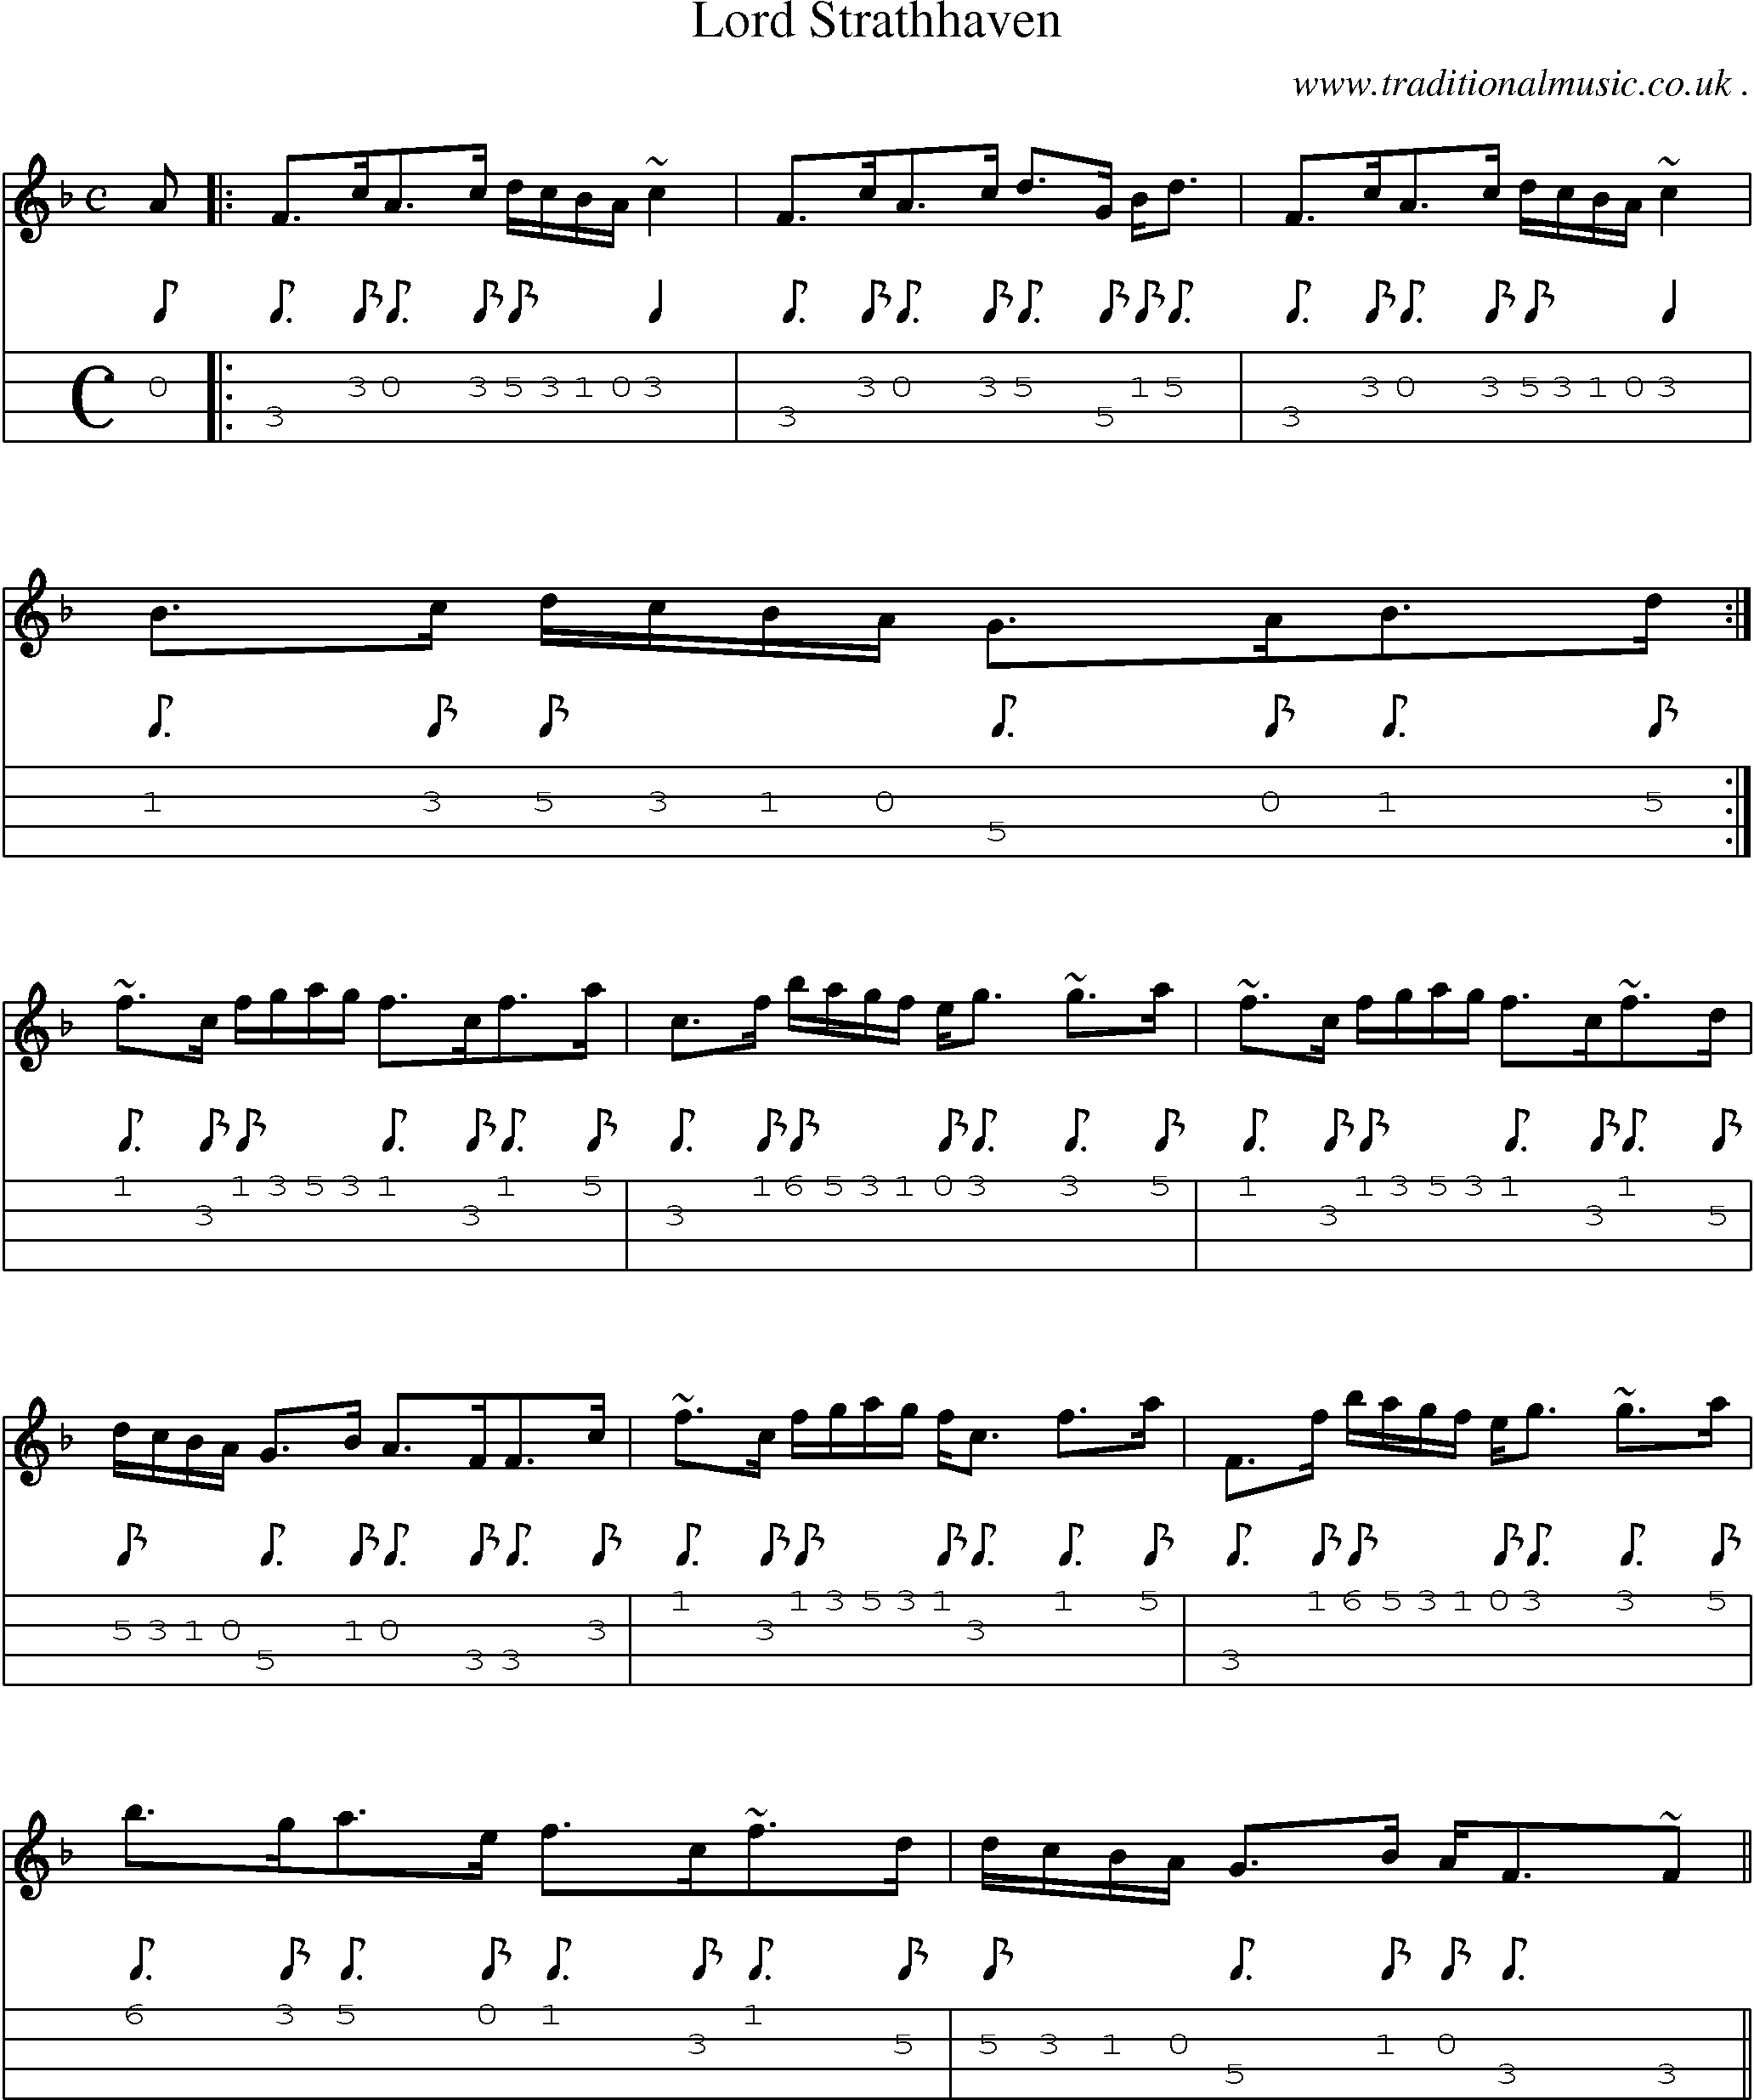 Sheet-music  score, Chords and Mandolin Tabs for Lord Strathhaven